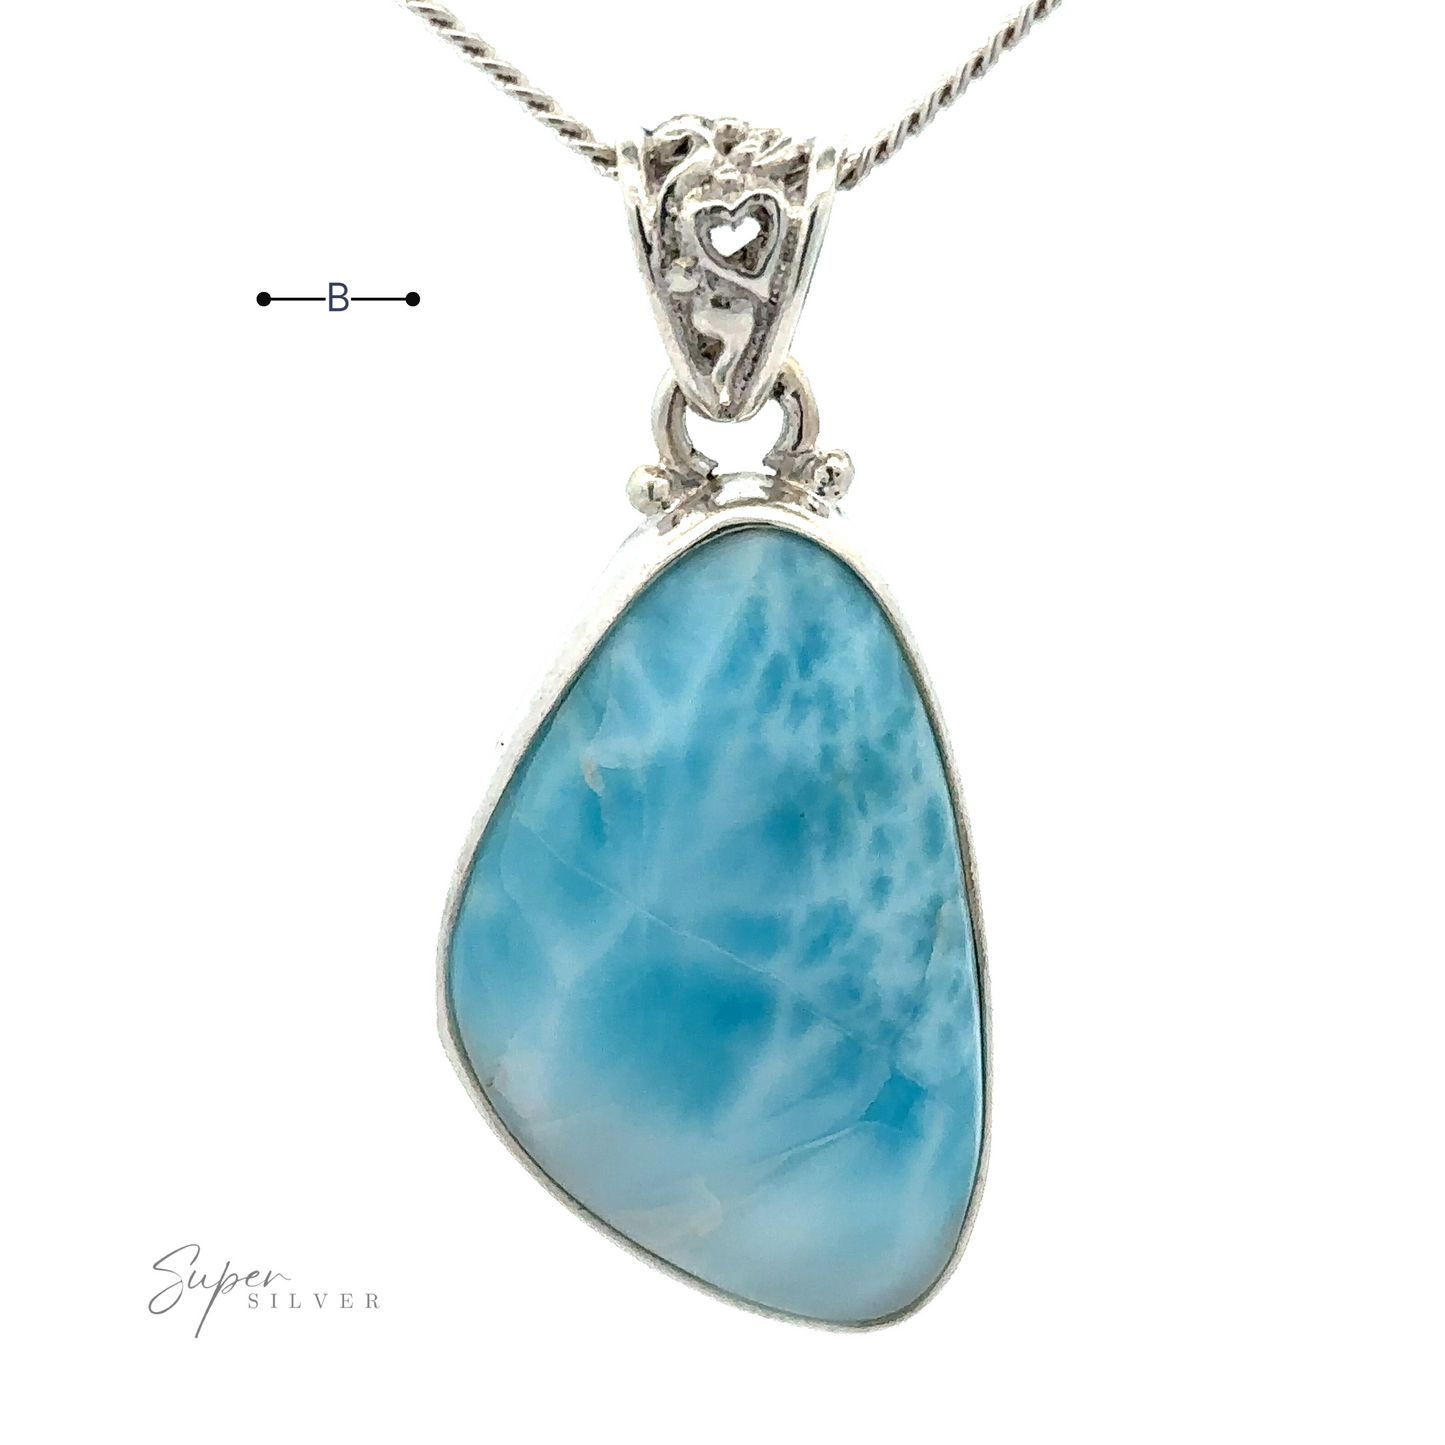 
                  
                    A blue Freeform Shape Larimar Pendant on a Sterling Silver chain with ornate detailing. The pendant has a triangular shape with a polished surface. The brand "Super Silver" is noted in the bottom left corner. Chain not included.
                  
                